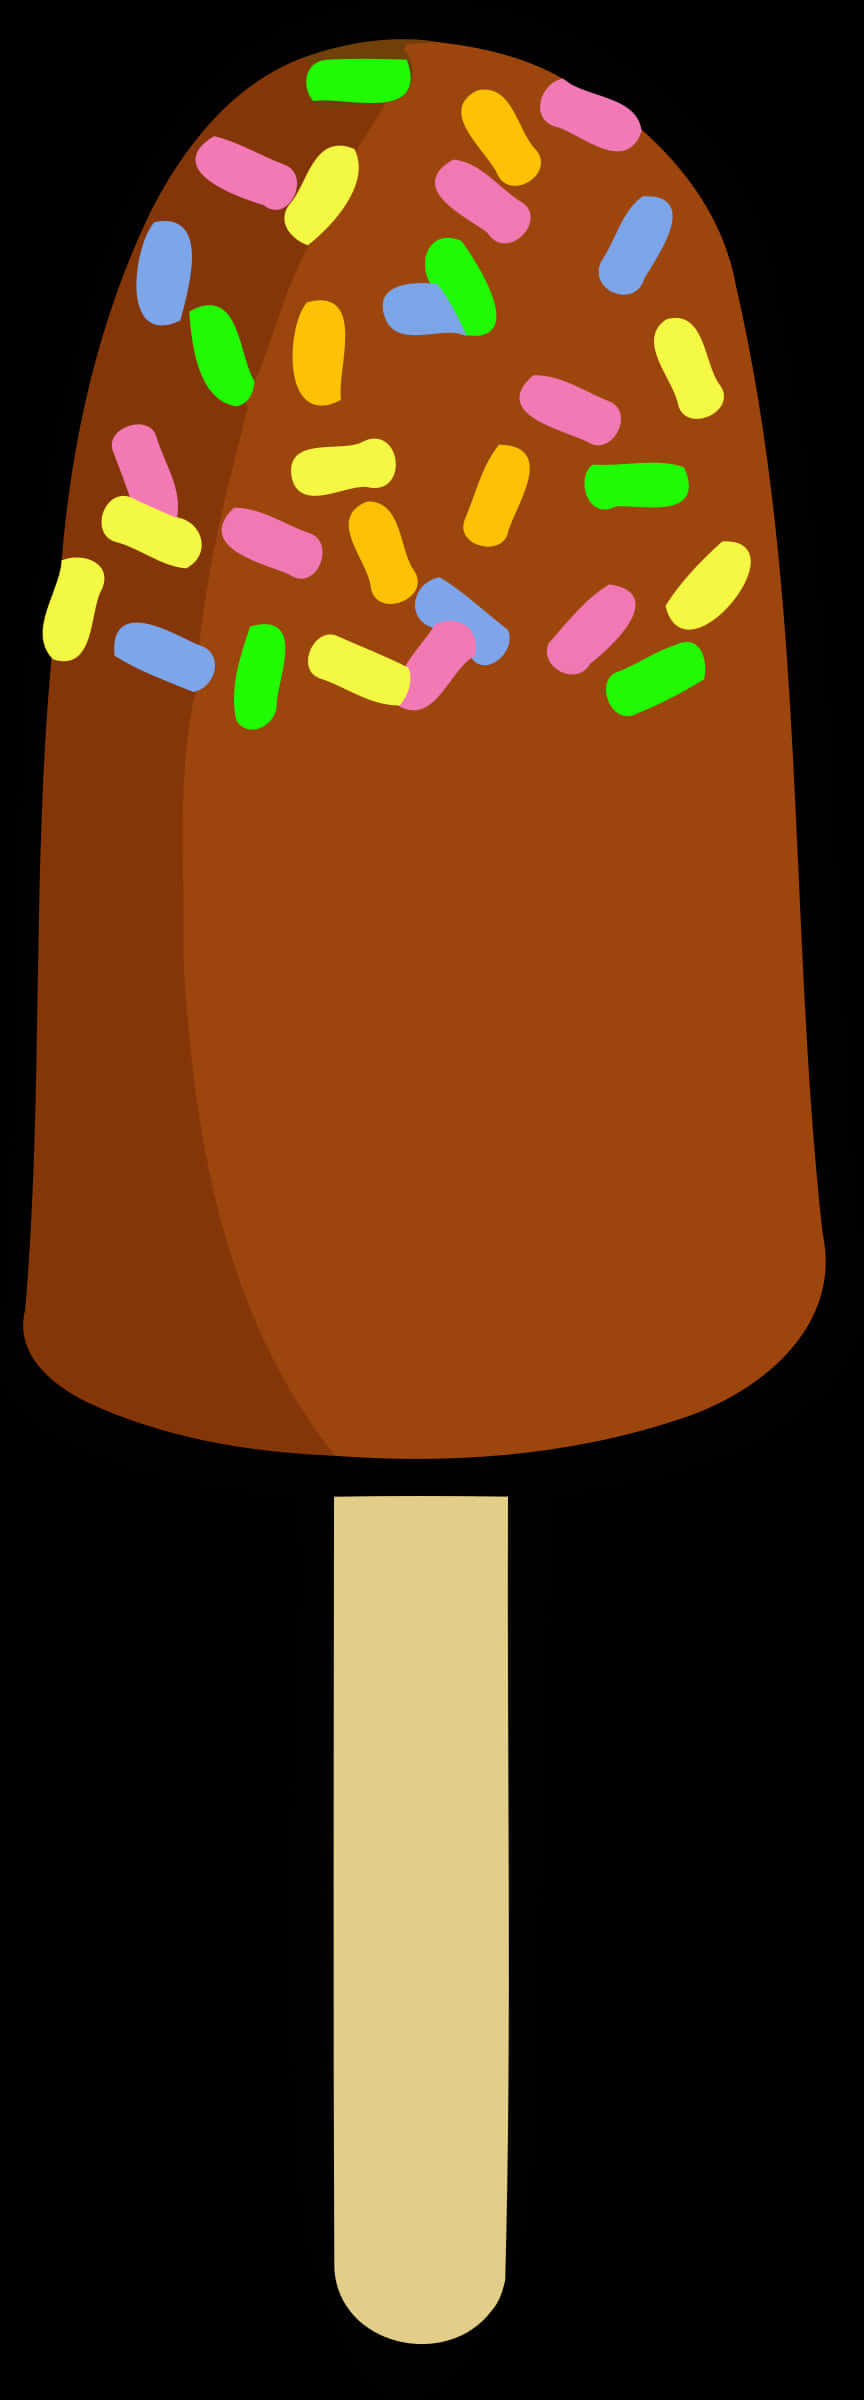 Chocolate Sprinkled Ice Cream Popsicle Clipart